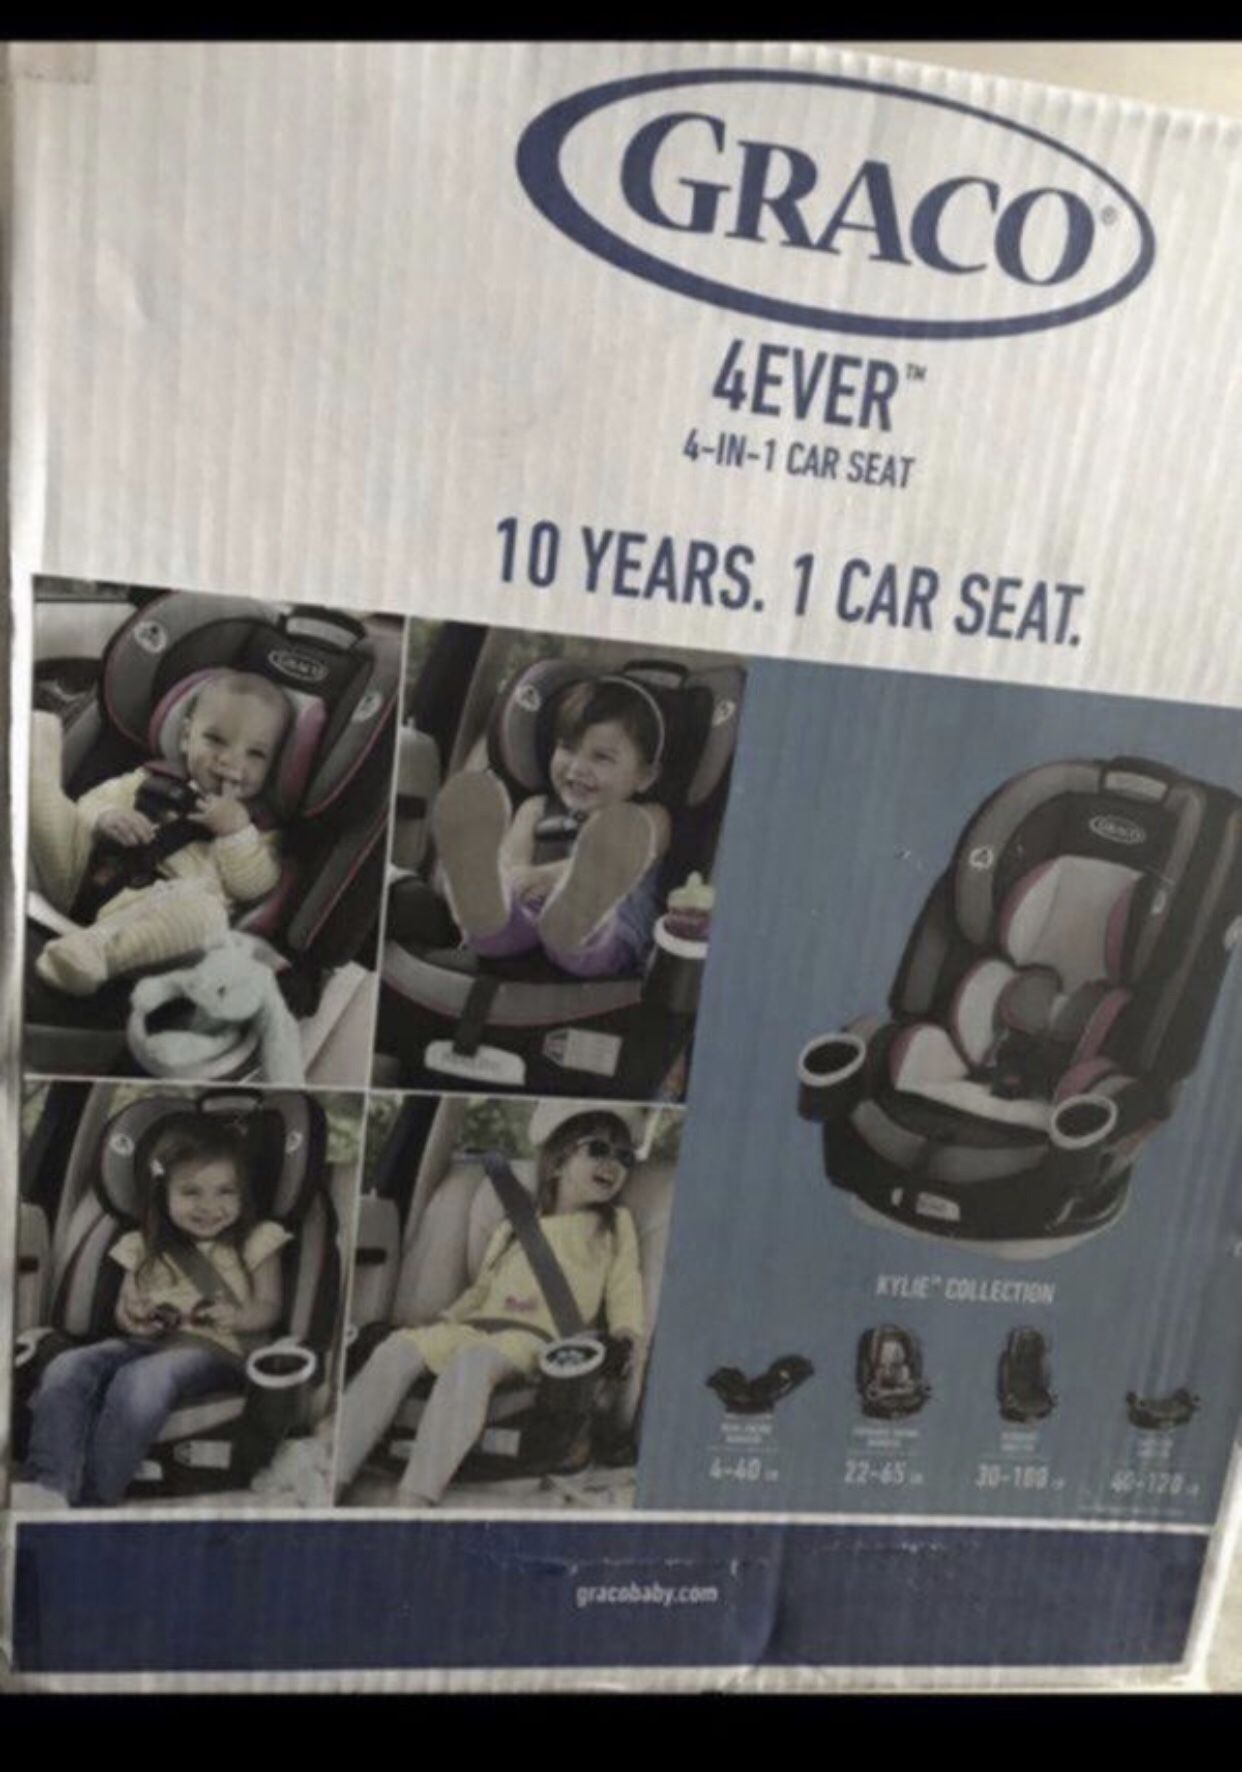 GRACO 4EVER 4 IN 1 CONVERTIBLE CAR SEAT IN KYLIE COLOR